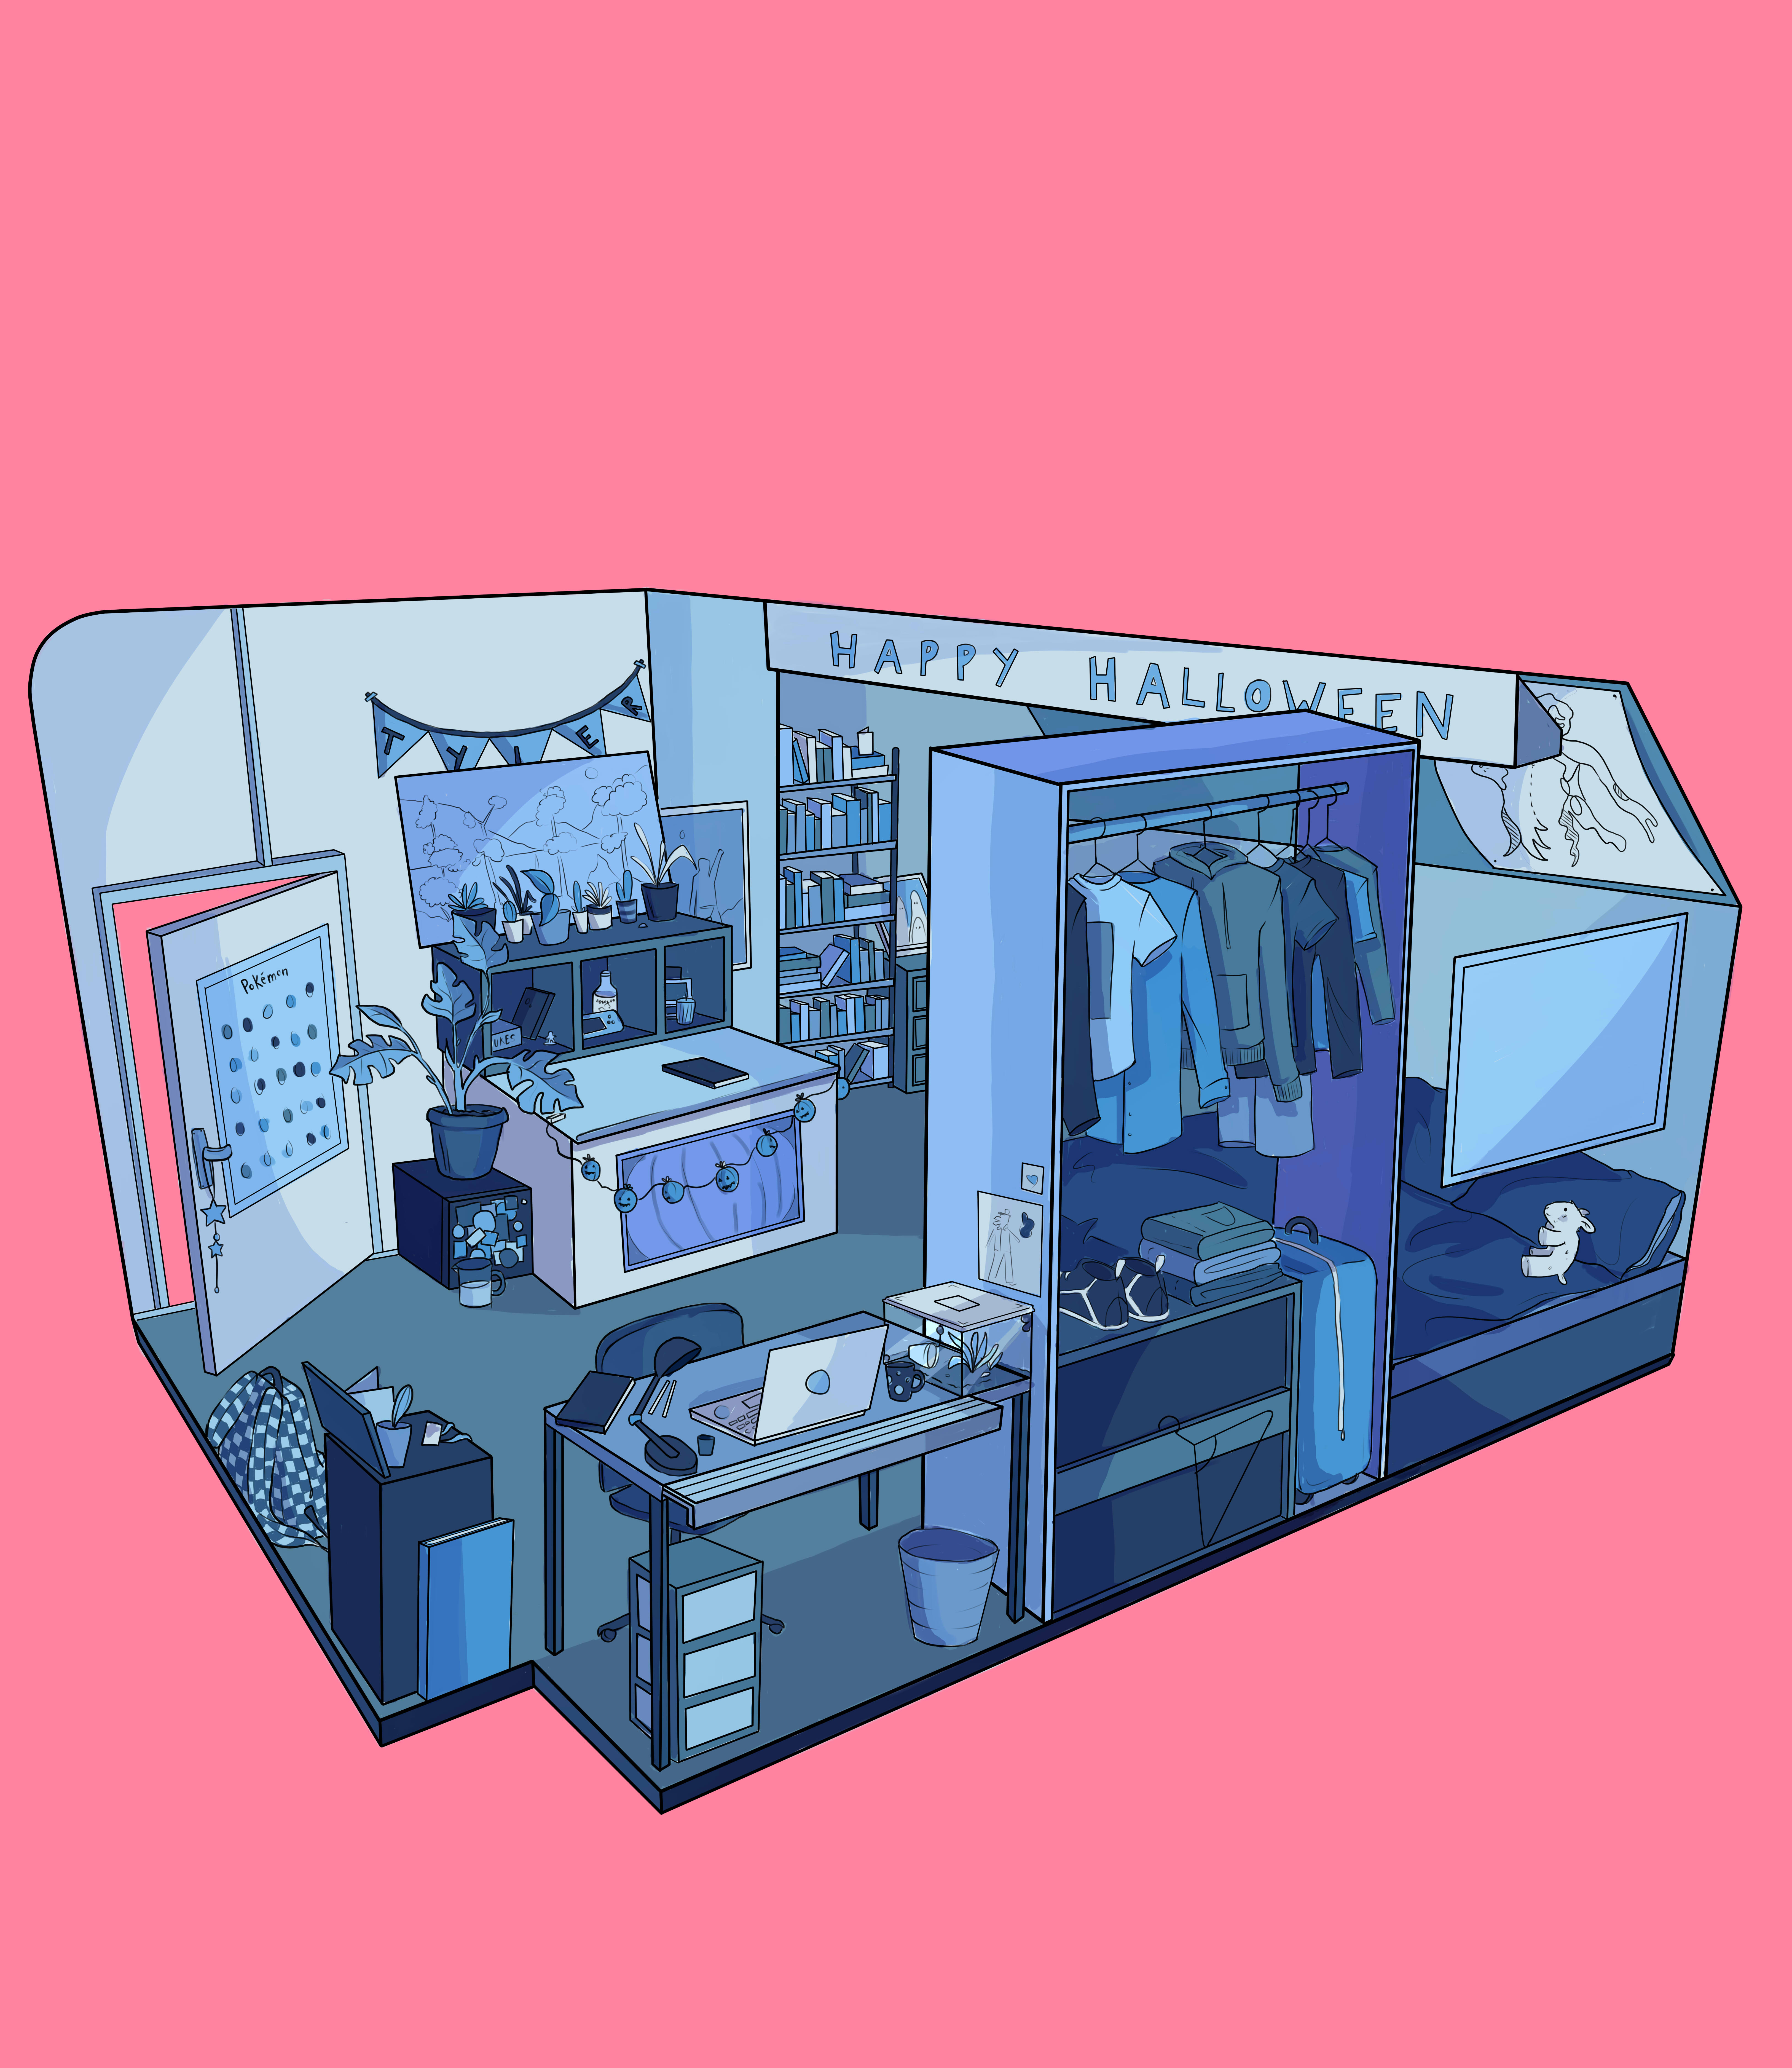 An illustration on an all pink background of a room in tones of blue. Within the room you can see details of bookshelves, posters, a happy hallowwen banner, a series of tshirt hanging in a closet, an open laptop on the desk and a small stuffed toy on the sofa